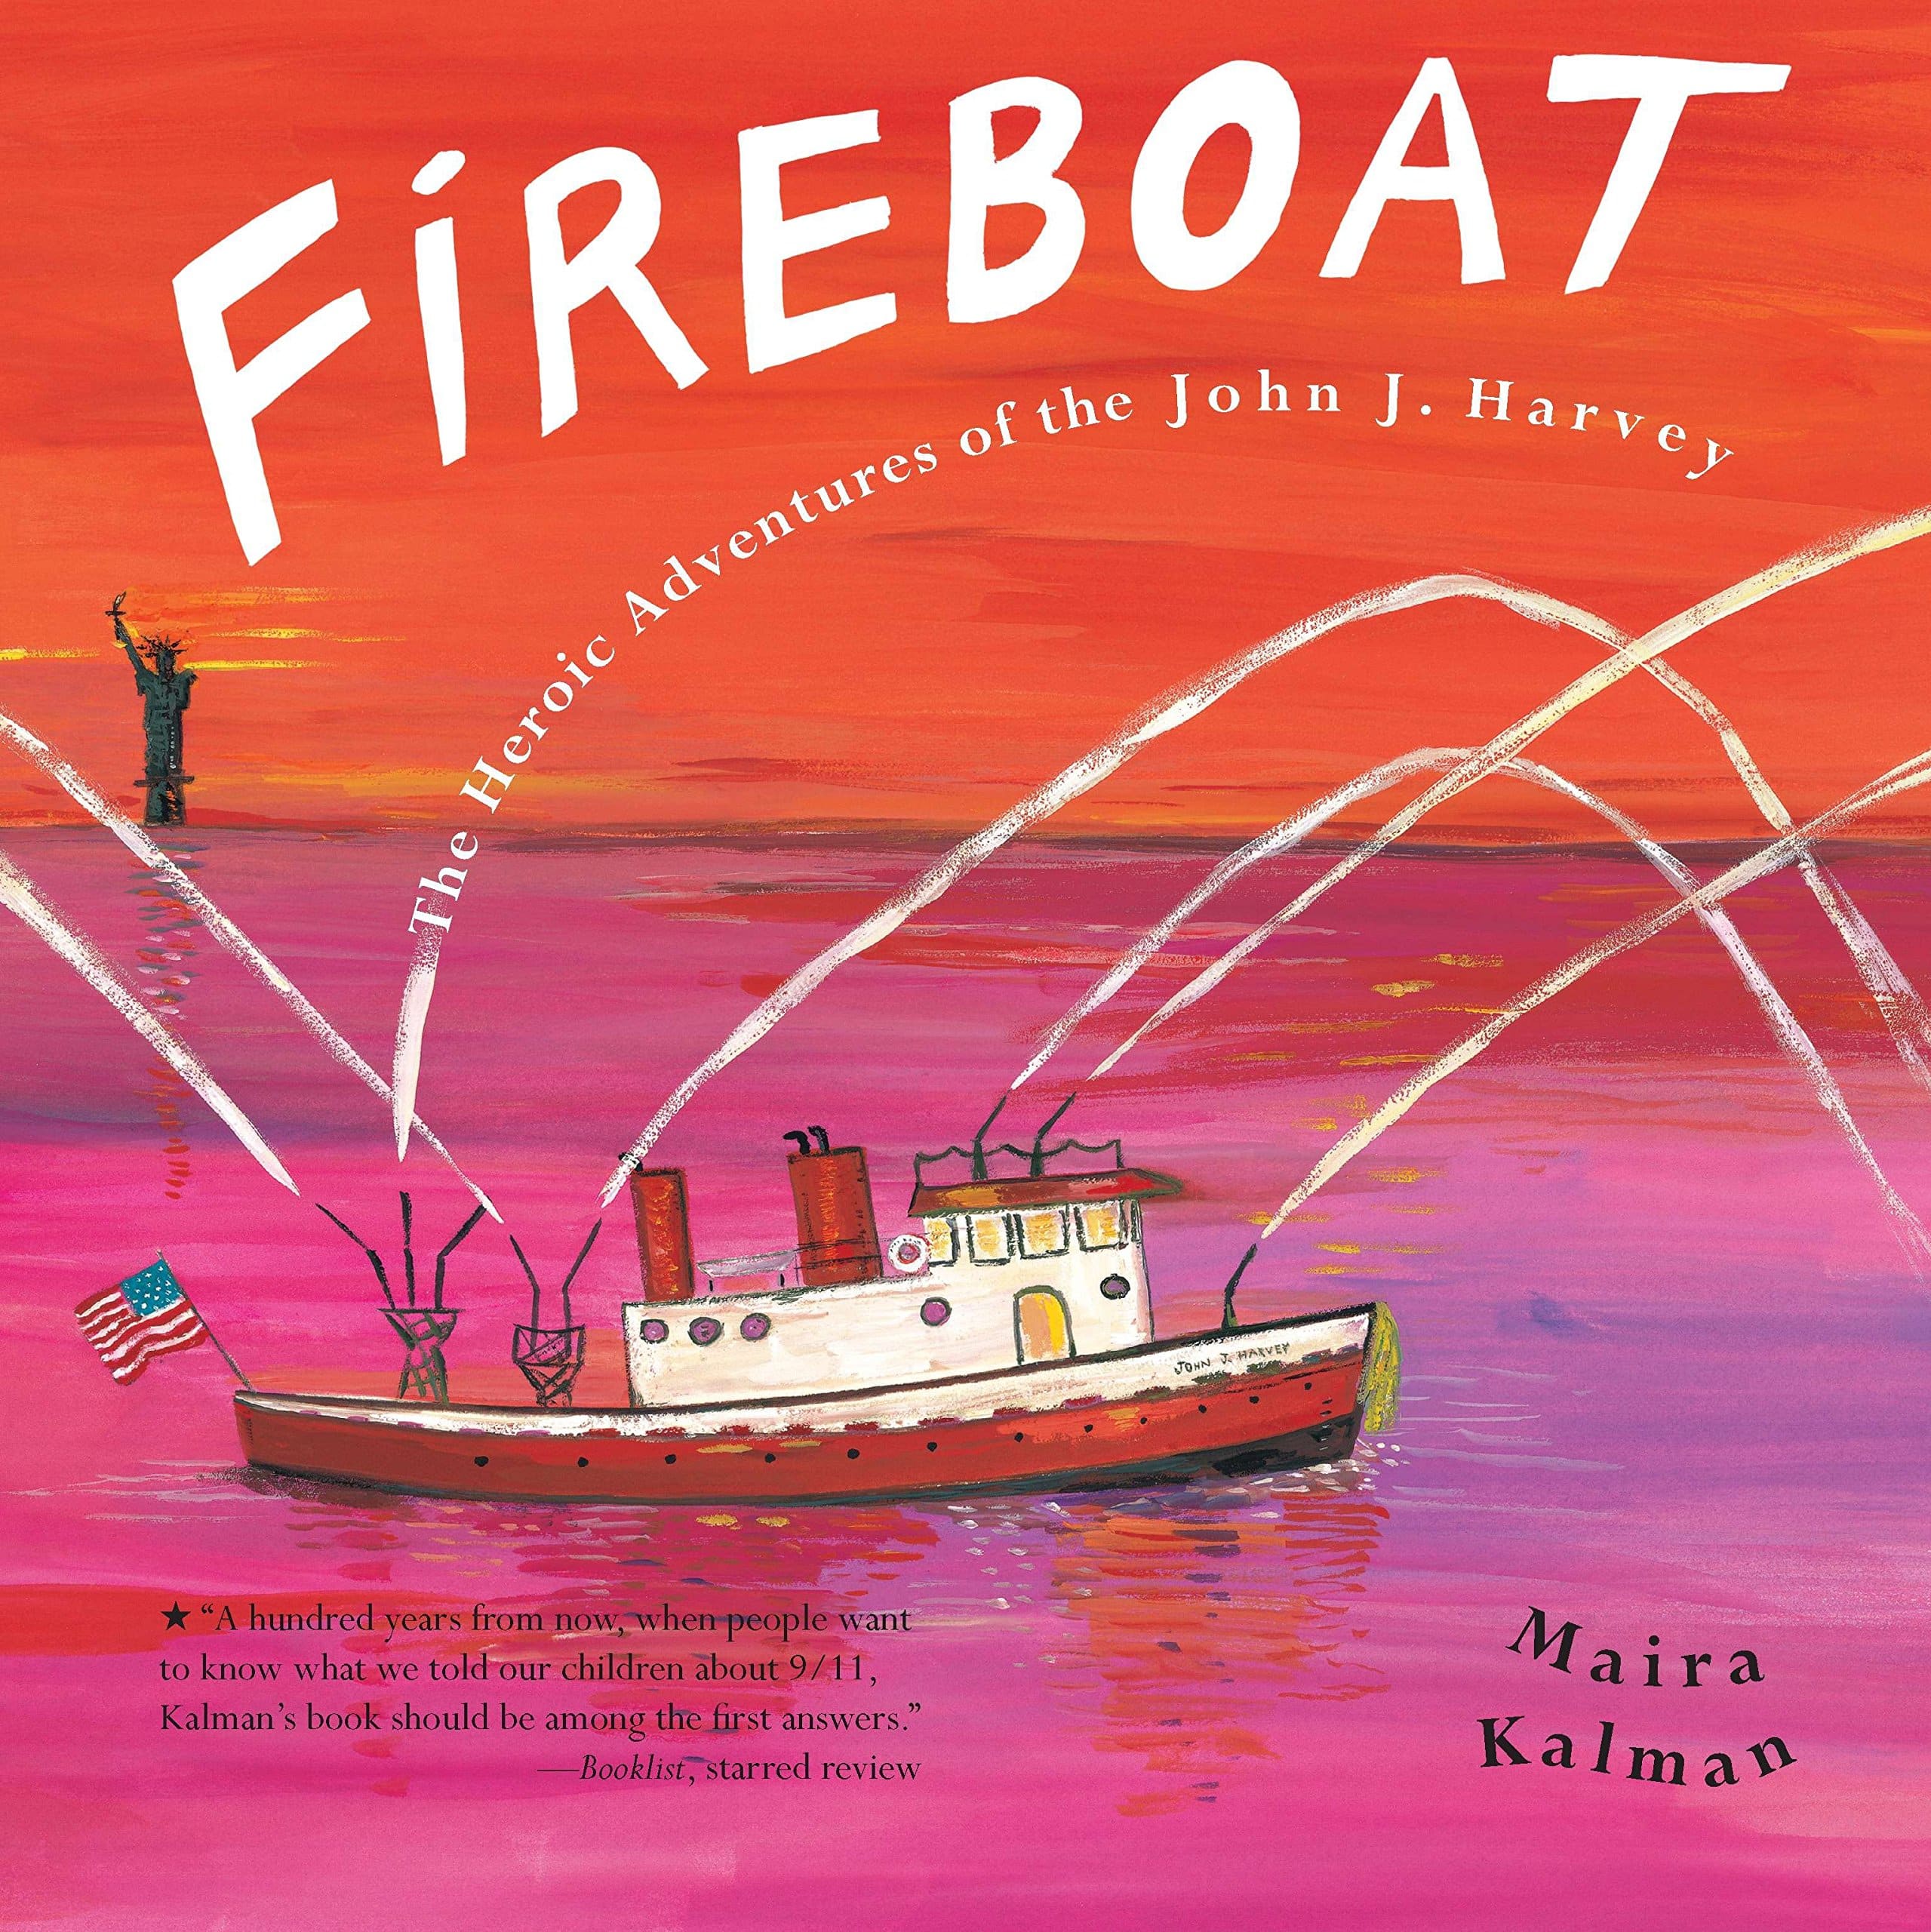 The cover for the book Fireboat